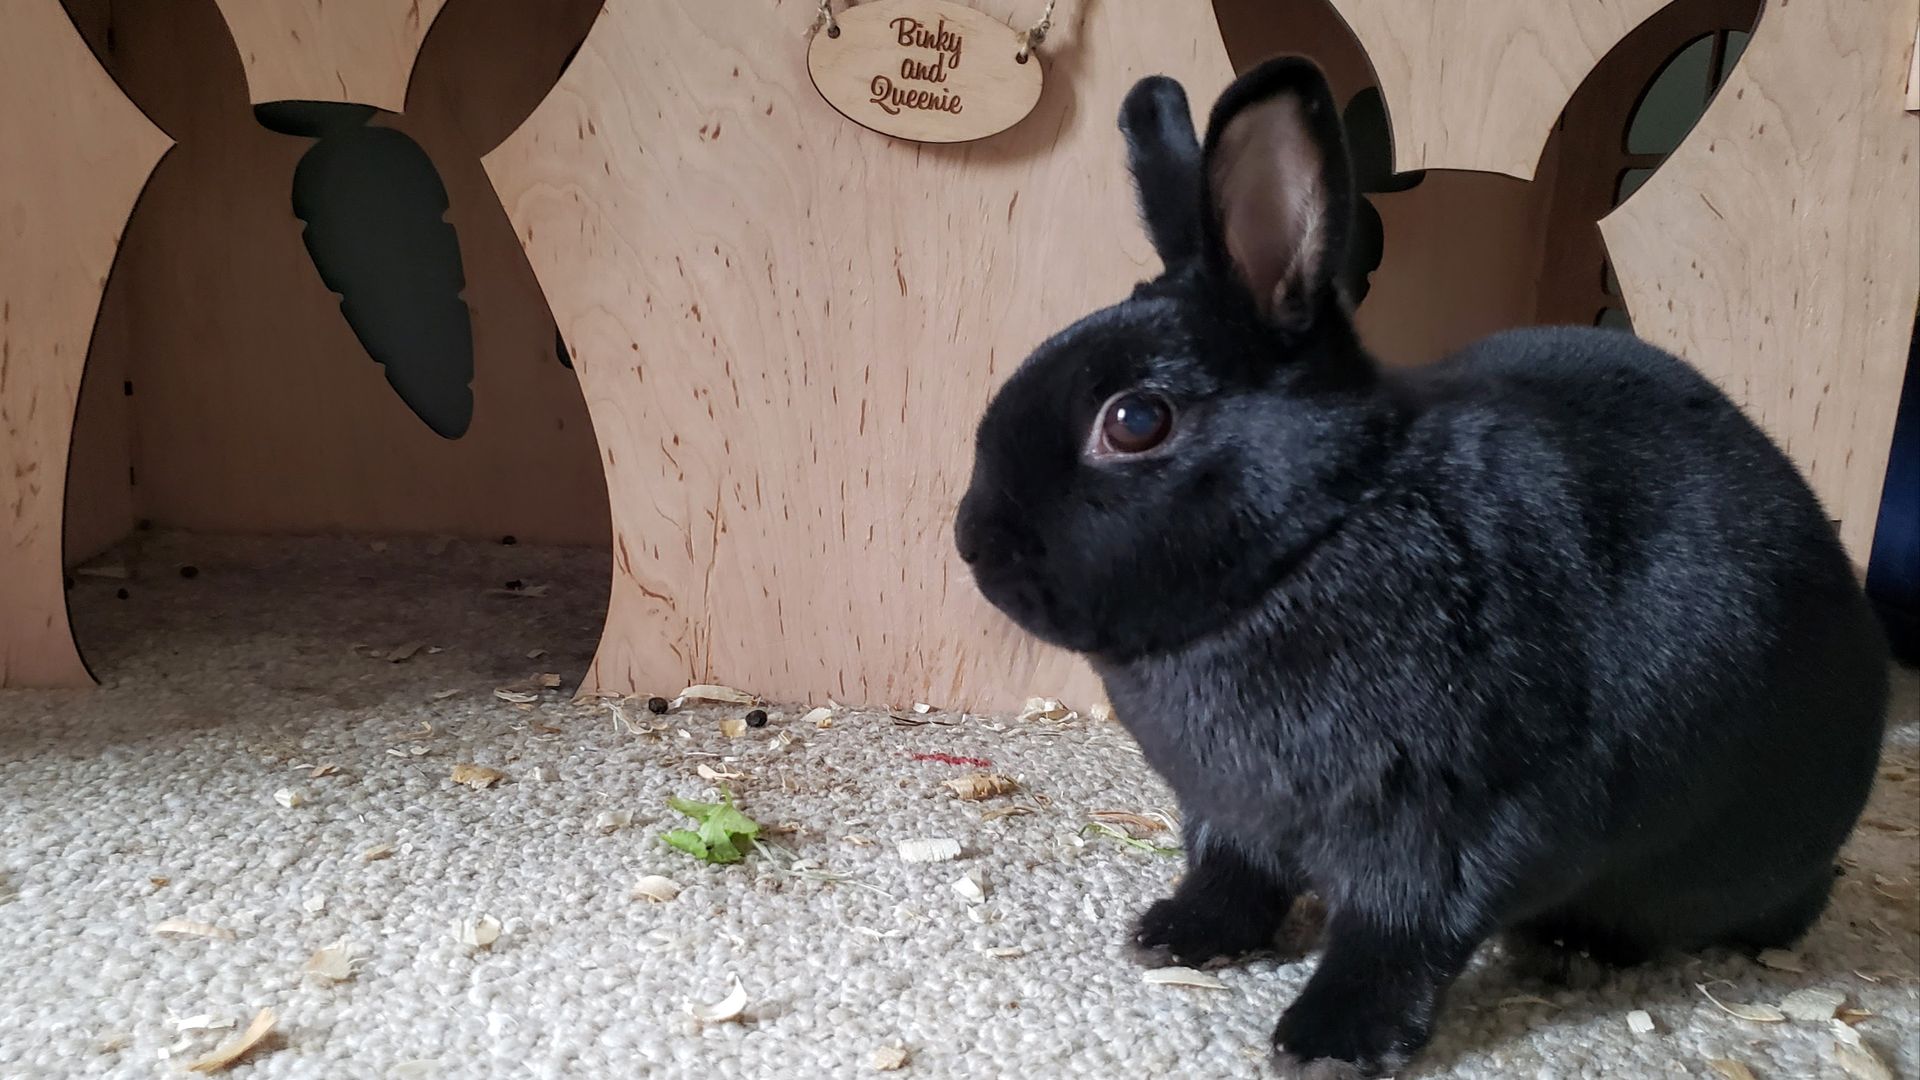 Rabbit in front of a hutch